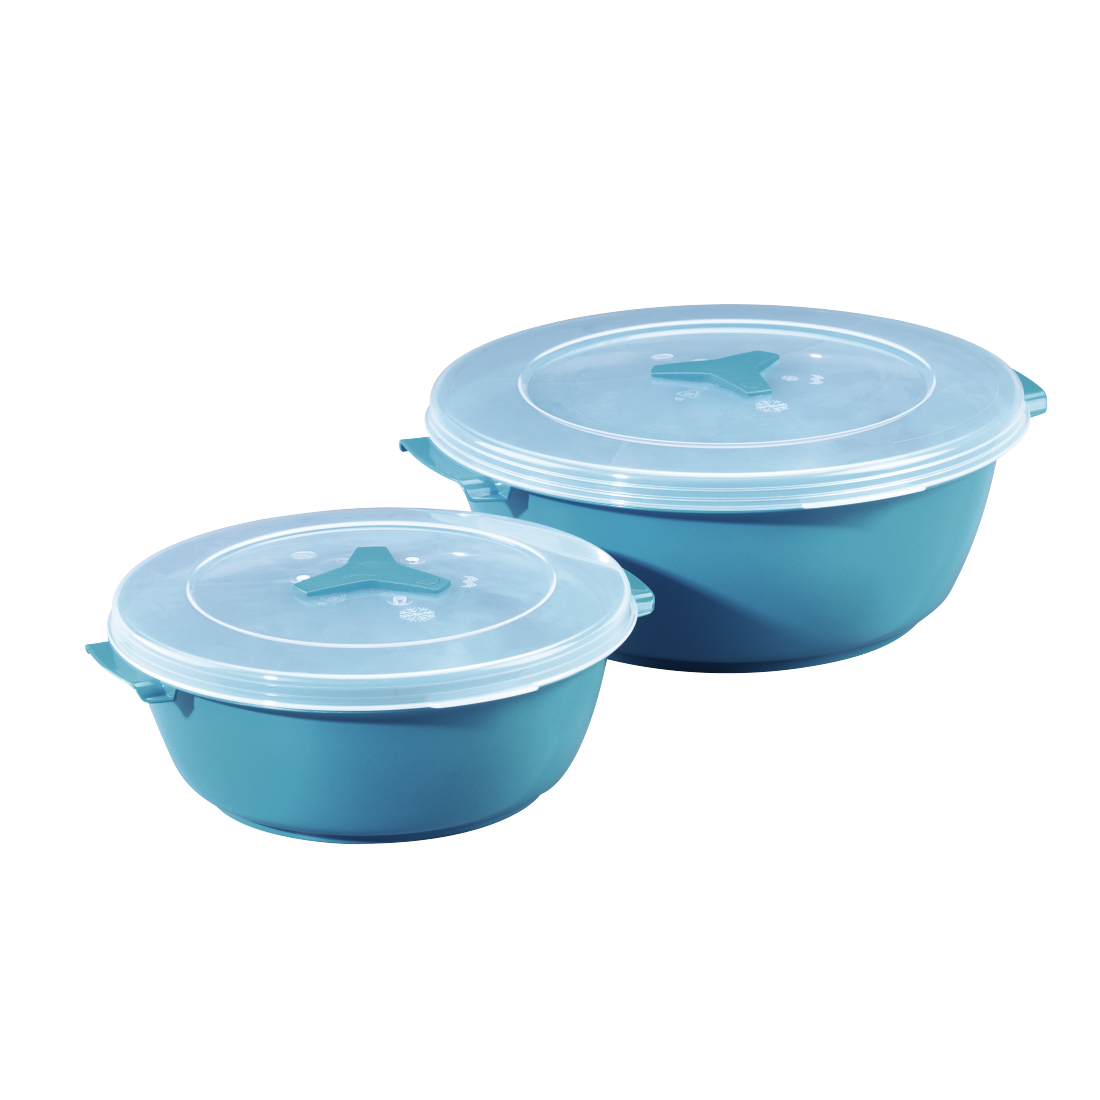 abx2 High-Res Image 2 - Xavax, Round Microwave / Freezer Container Set, 2 Pcs., turquoise / burgundy